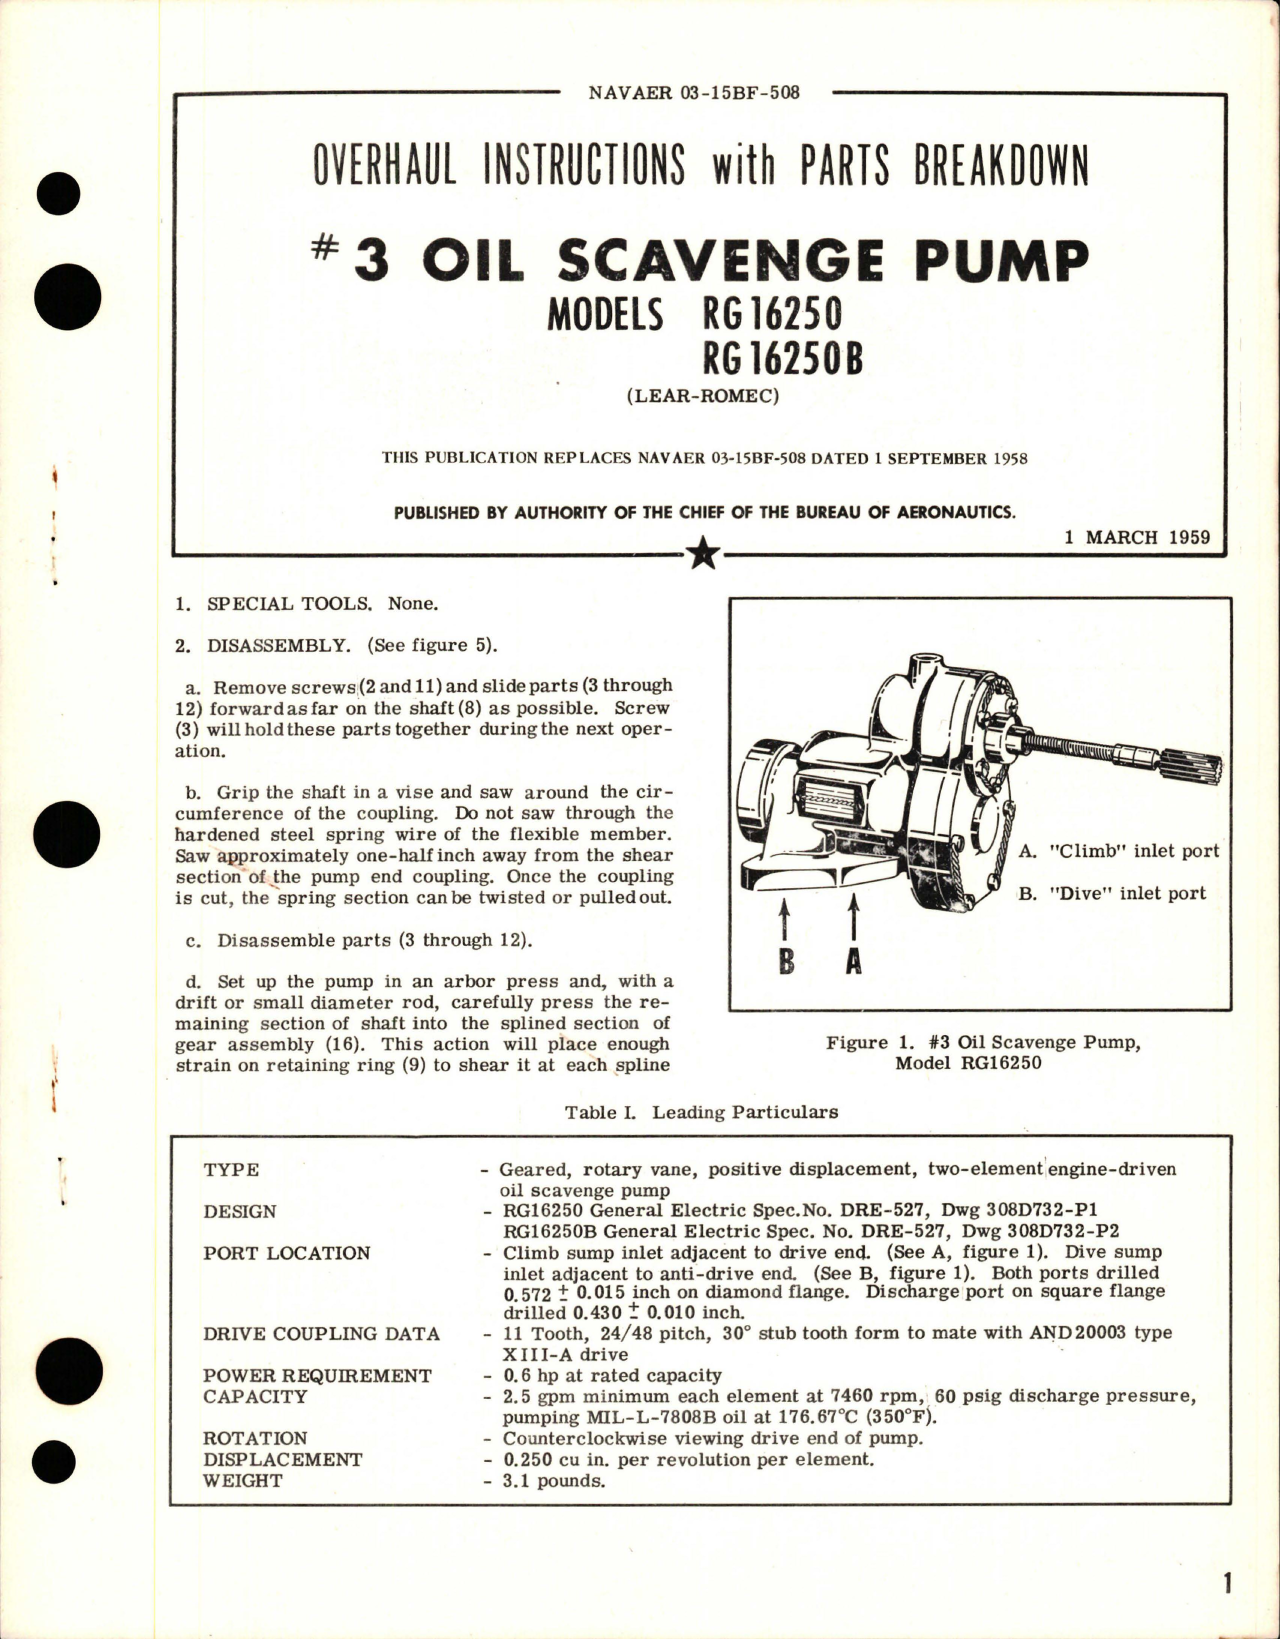 Sample page 1 from AirCorps Library document: Overhaul Instructions with Parts for # 3 Oil Scavenge Pump - Models RG16250 and RG16250B